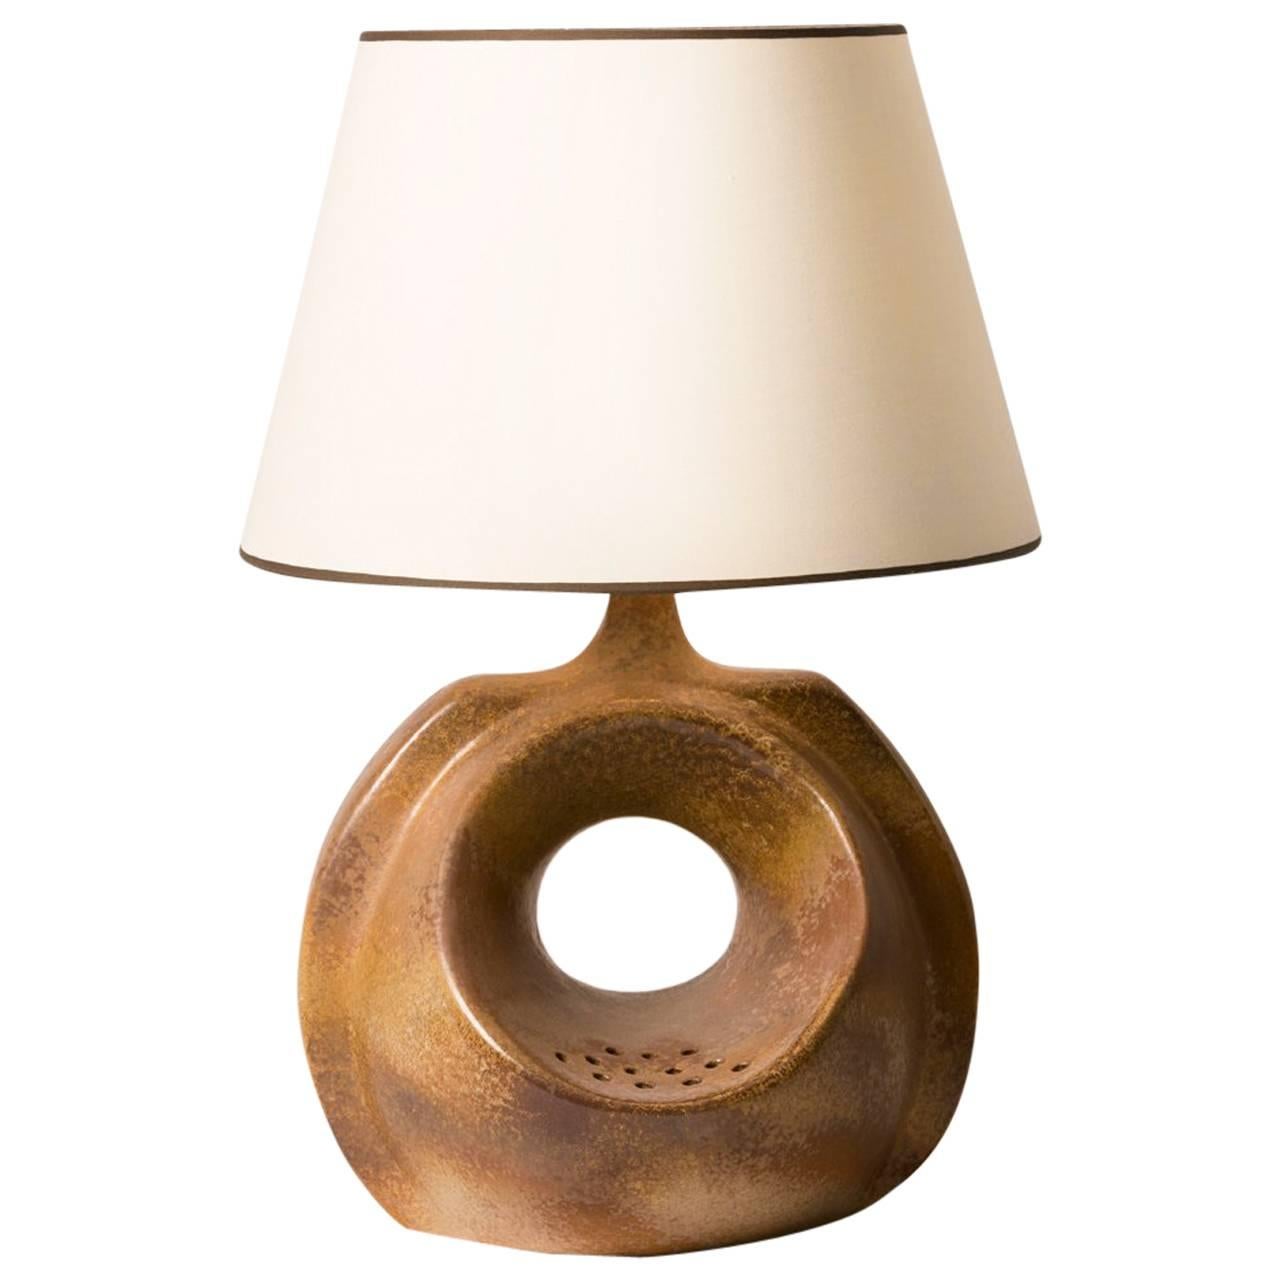 French Midcentury Ceramic Table Lamp from Vallauris